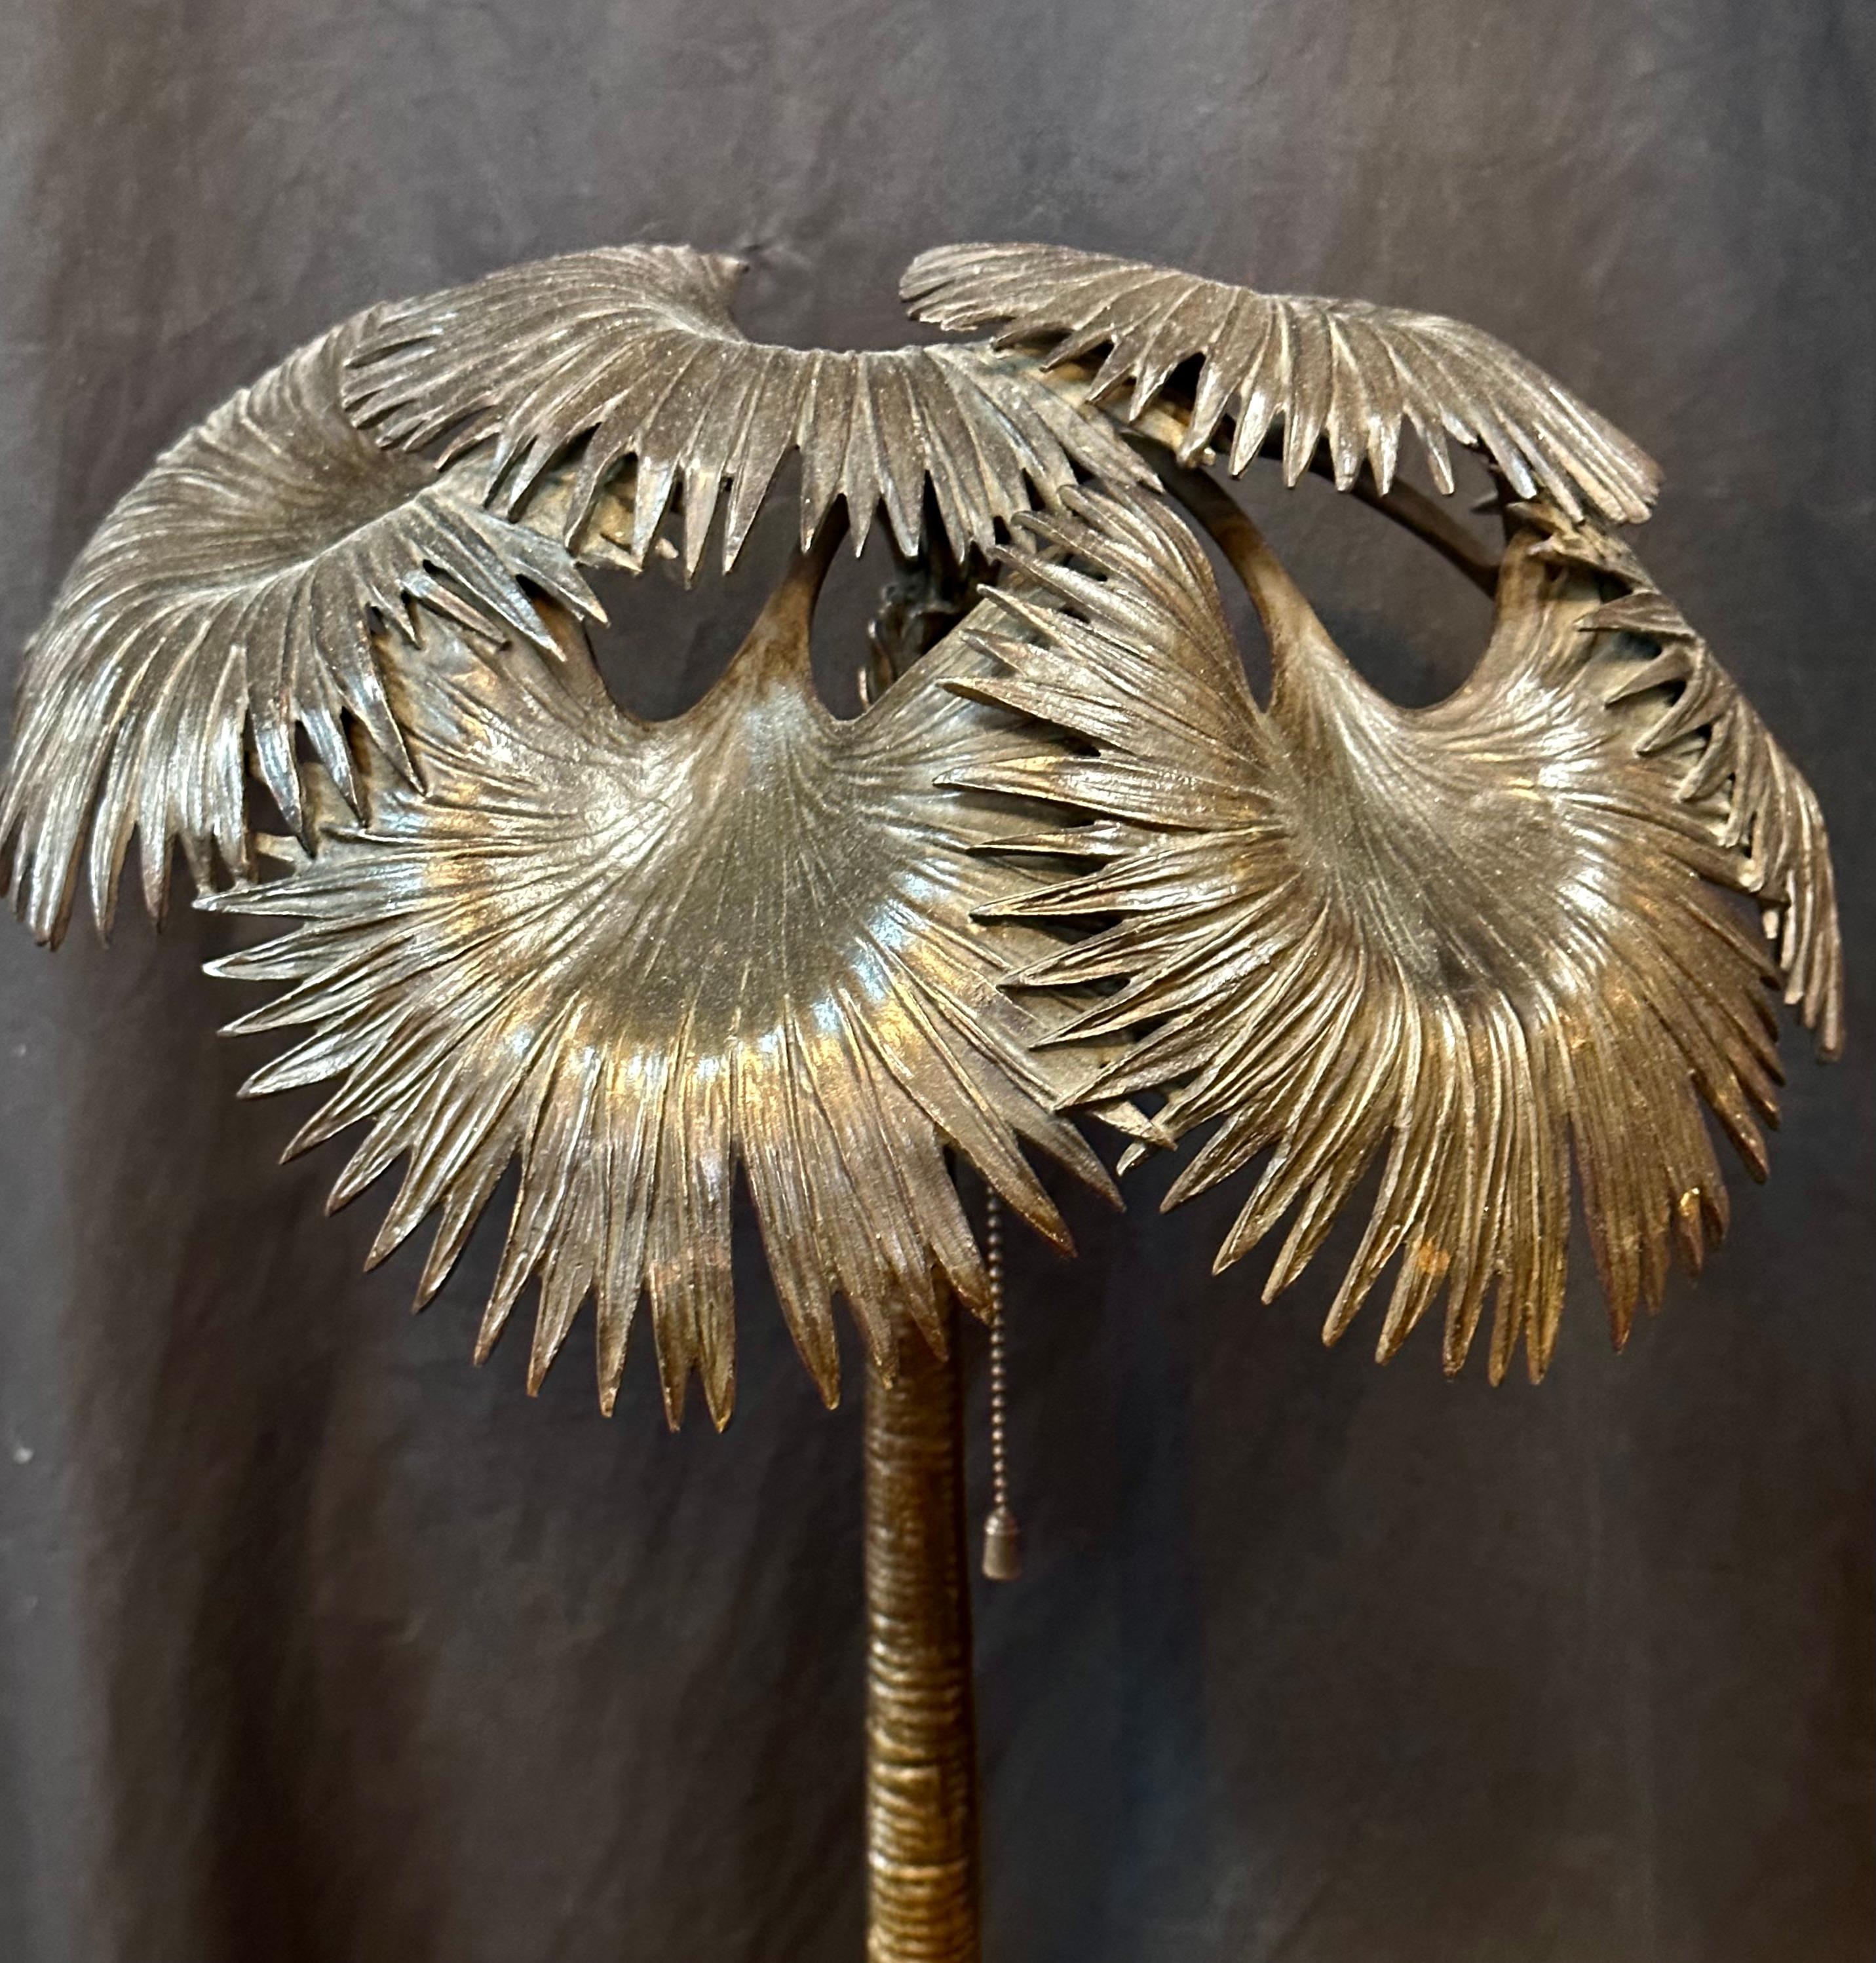 This vintage early 20th century Austrian bronze lamp is beautifully sculpted with two elephants under a palm tree. It has a naturalistic looking base that is stamped AUSTRIA. The sculpture is reminiscent of a Bergman bronze creation, but it is